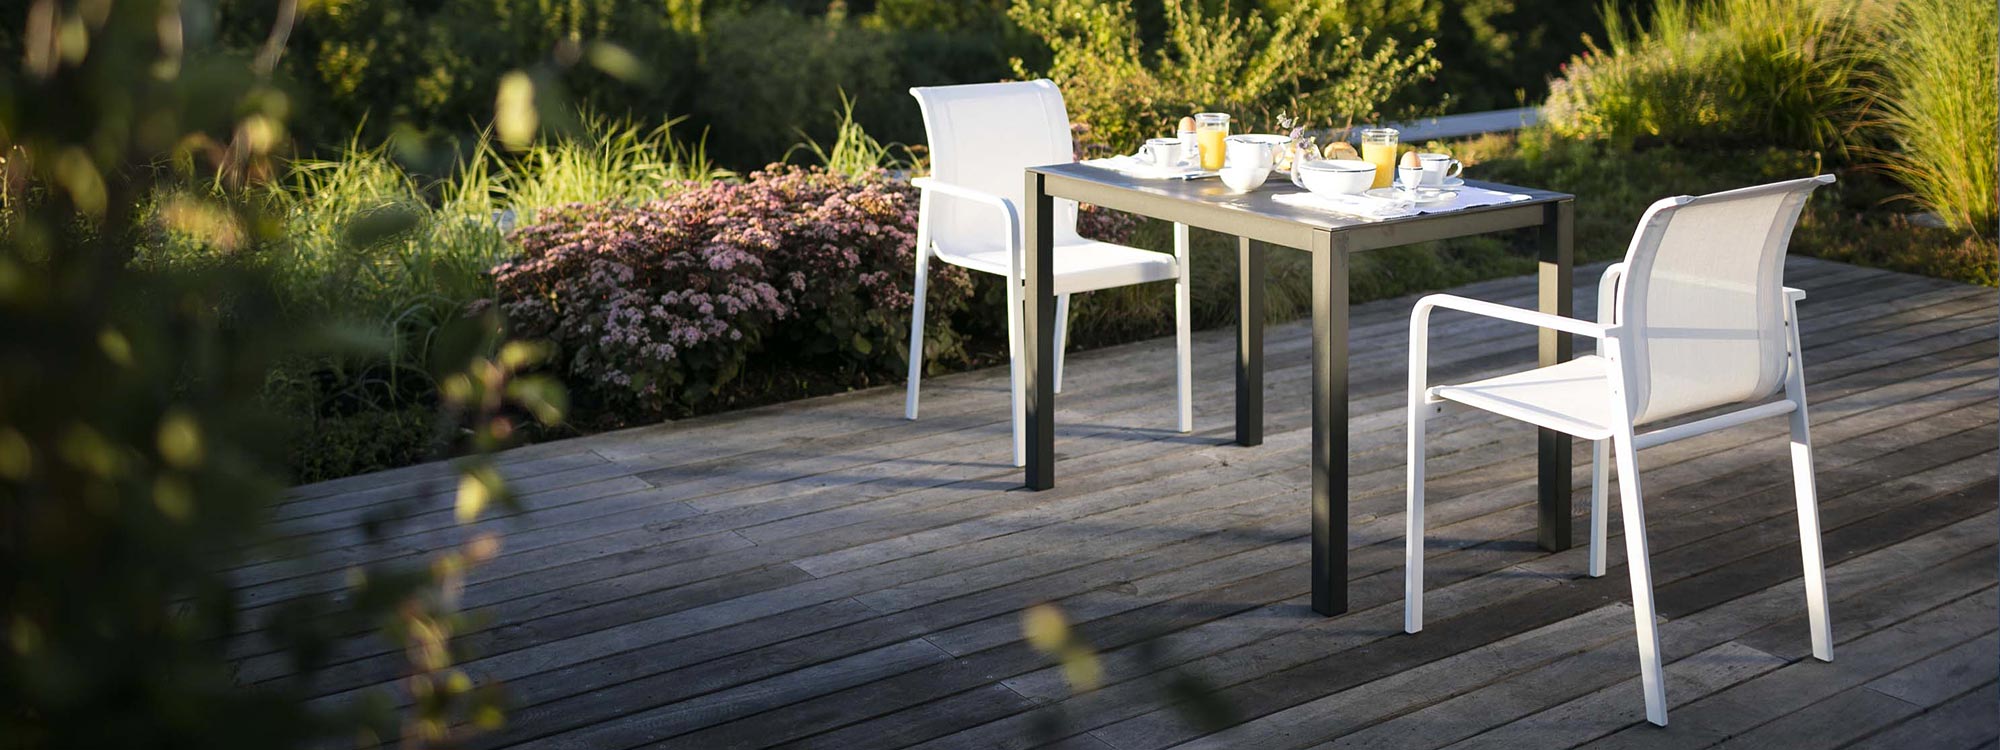 Image of Puro small outdoor dining table and Puro modern garden chair on decking in front of flower bed